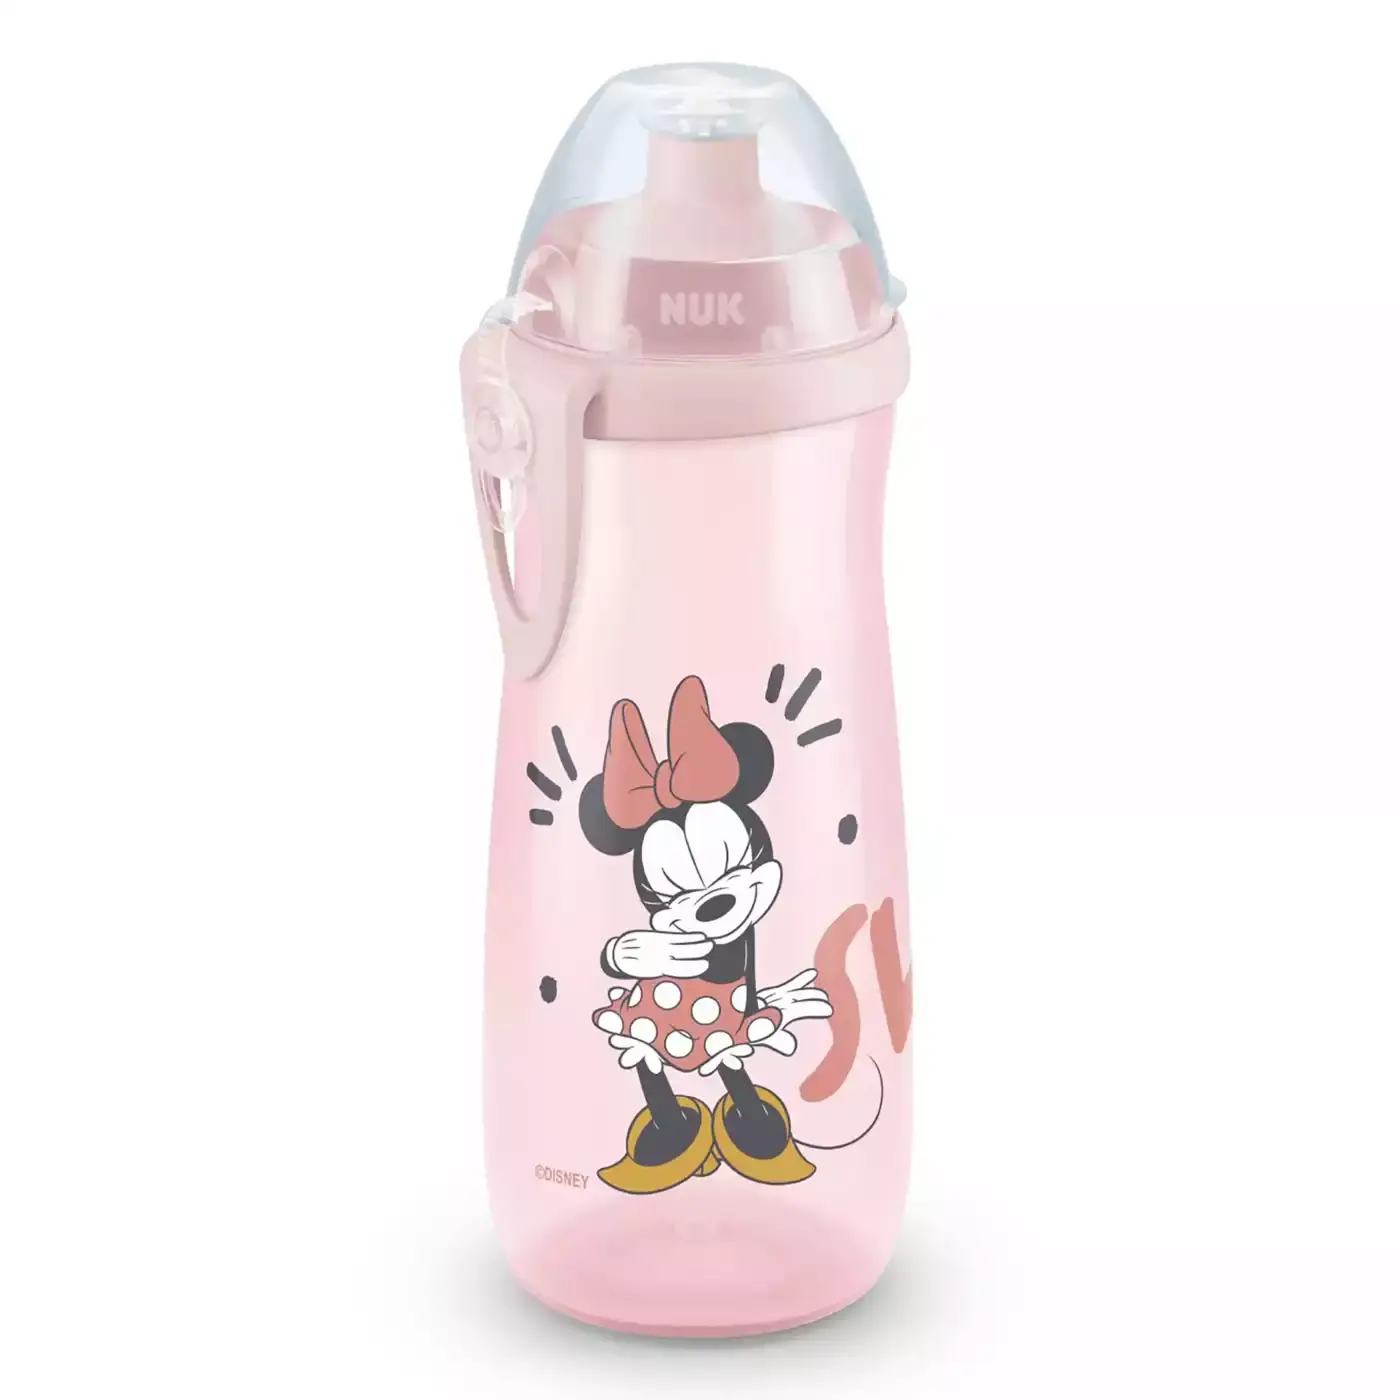 Sports Cup Minnie Mouse 450ml NUK Pink 2000581135403 1